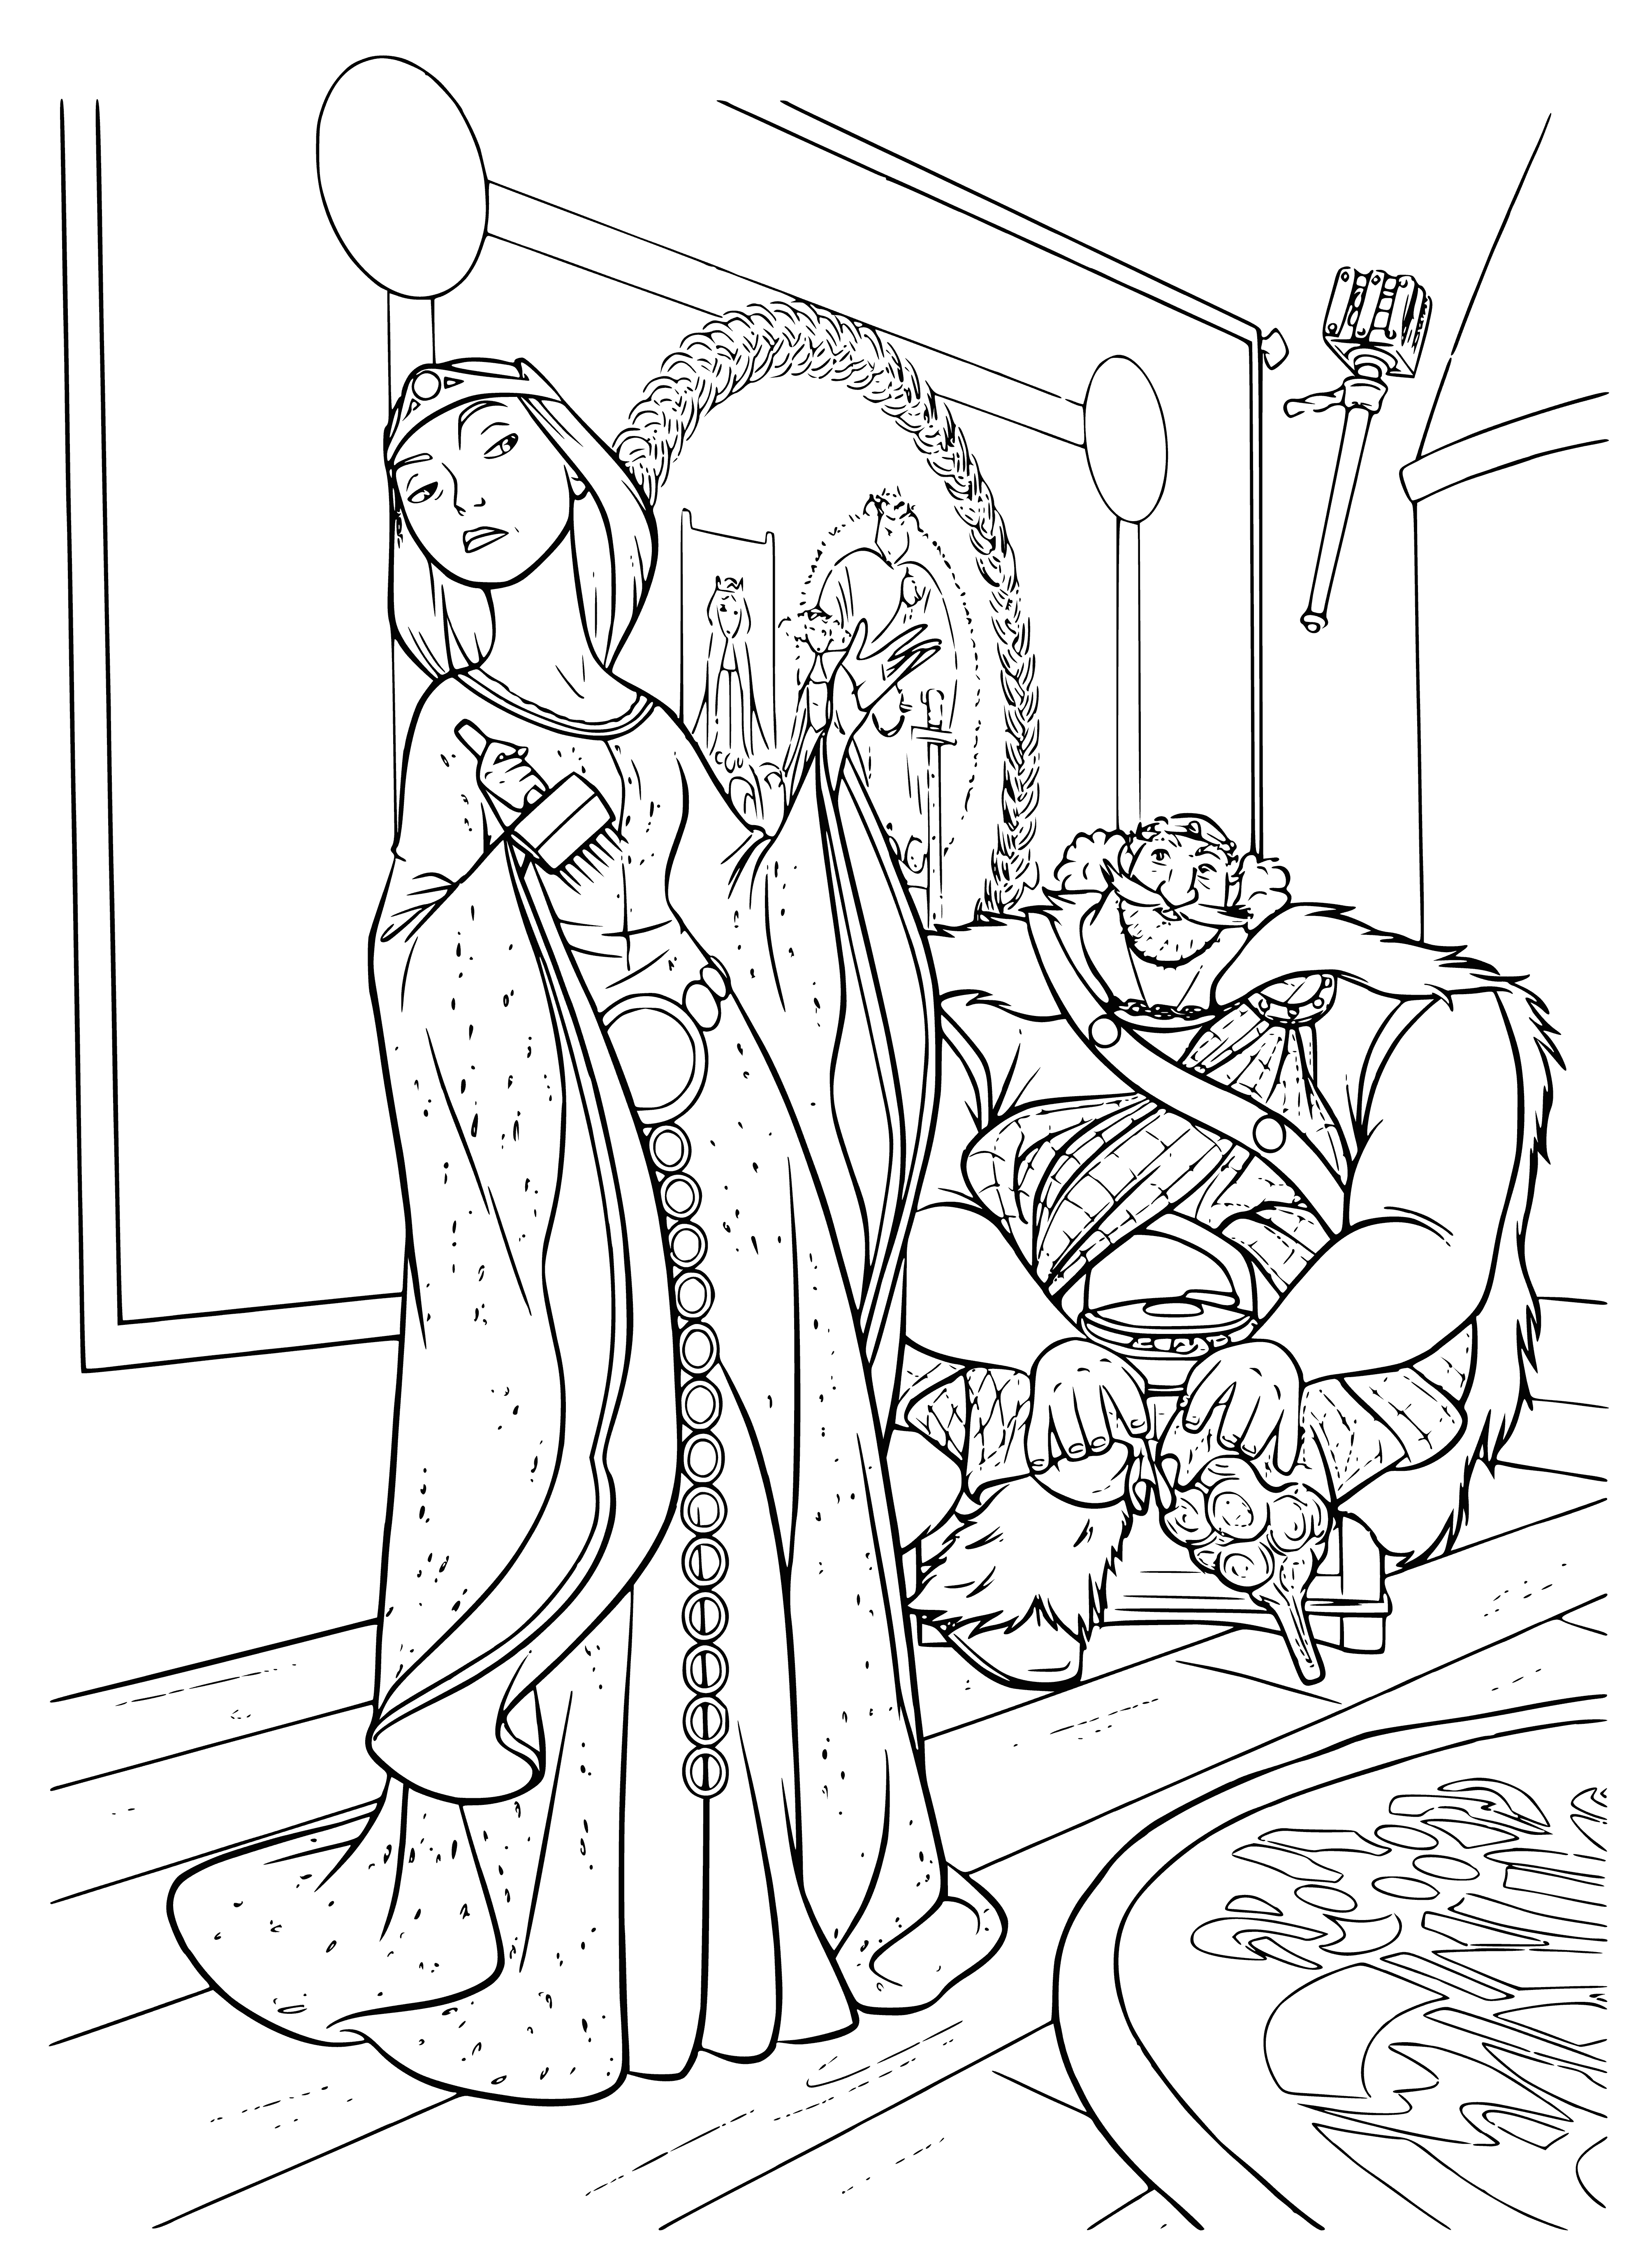 coloring page: King & Queen sit at opposite sides of a large table, arms crossed & fists clenched. The King scowling, Queen angry & upset.